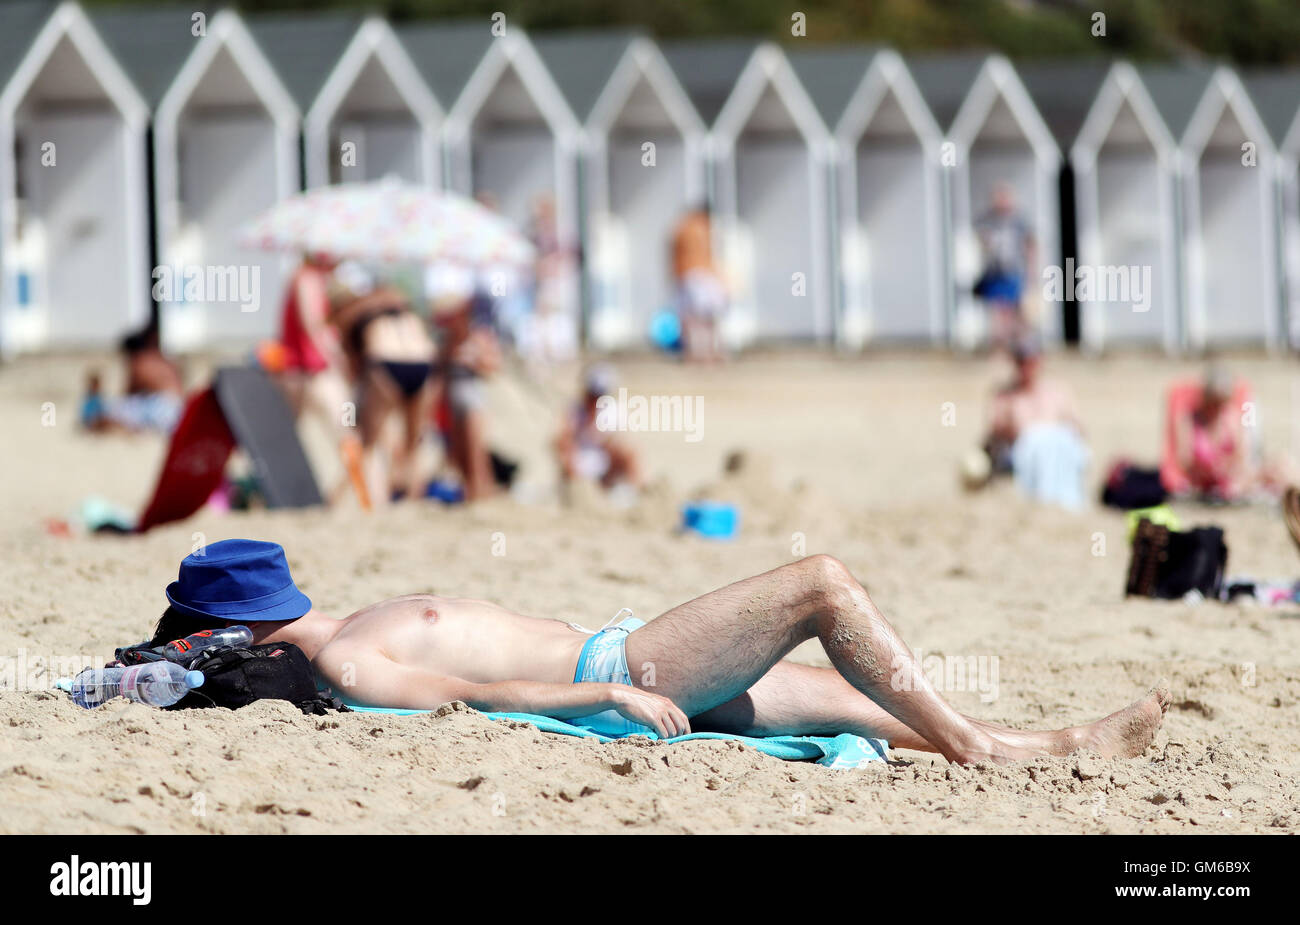 A man sunbathes on Branksome Chine Beach in Bournemouth, as a heatwave causes parts of the country to sizzle. Stock Photo